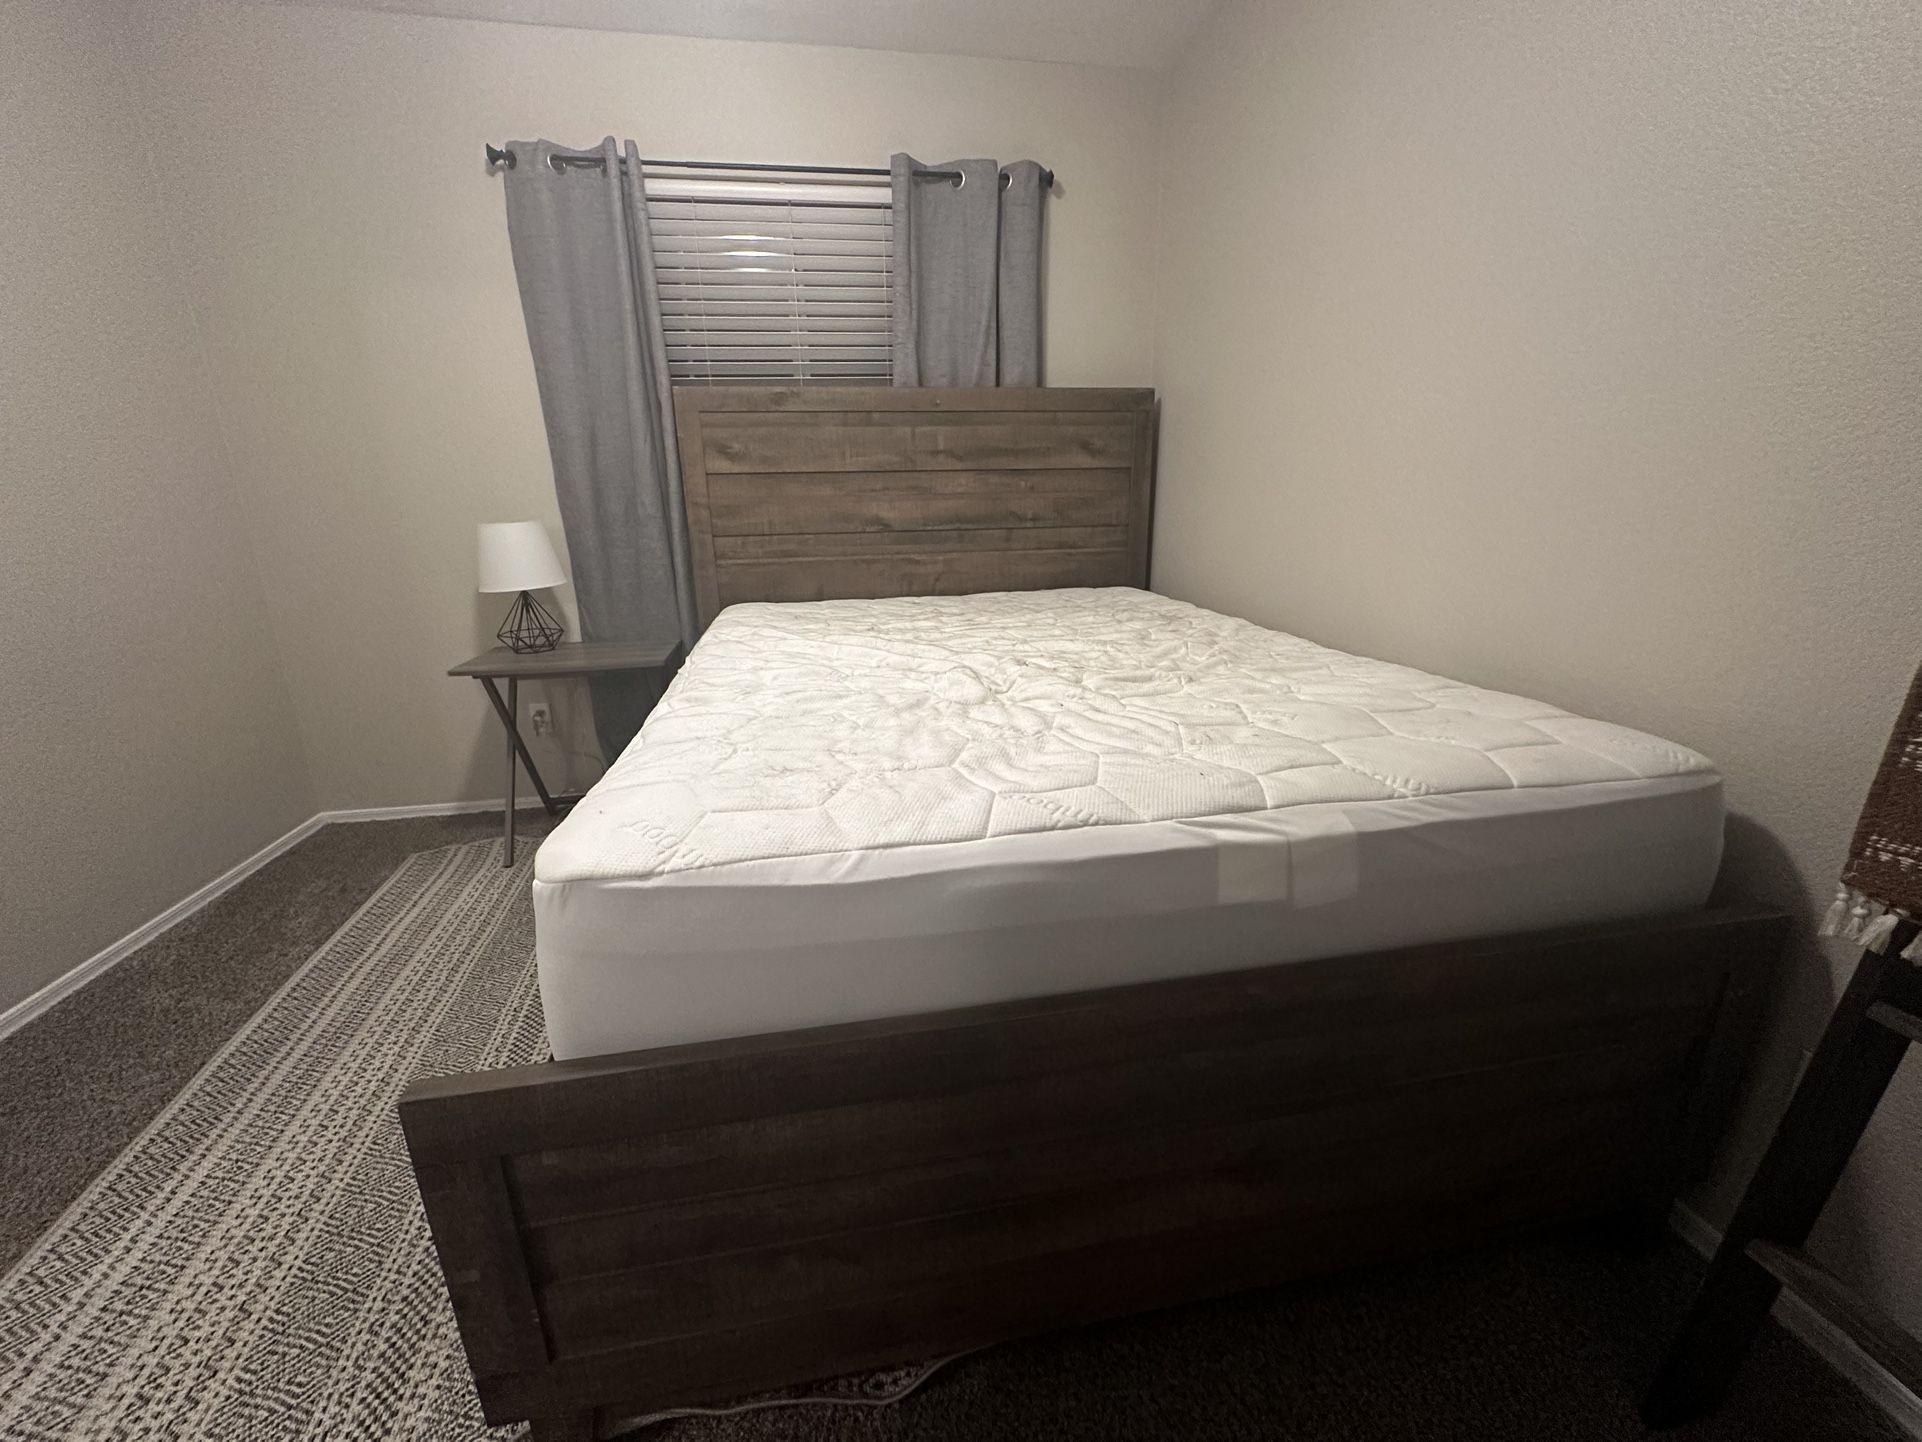 Queen Bed Frame Box Spring And Mattress 